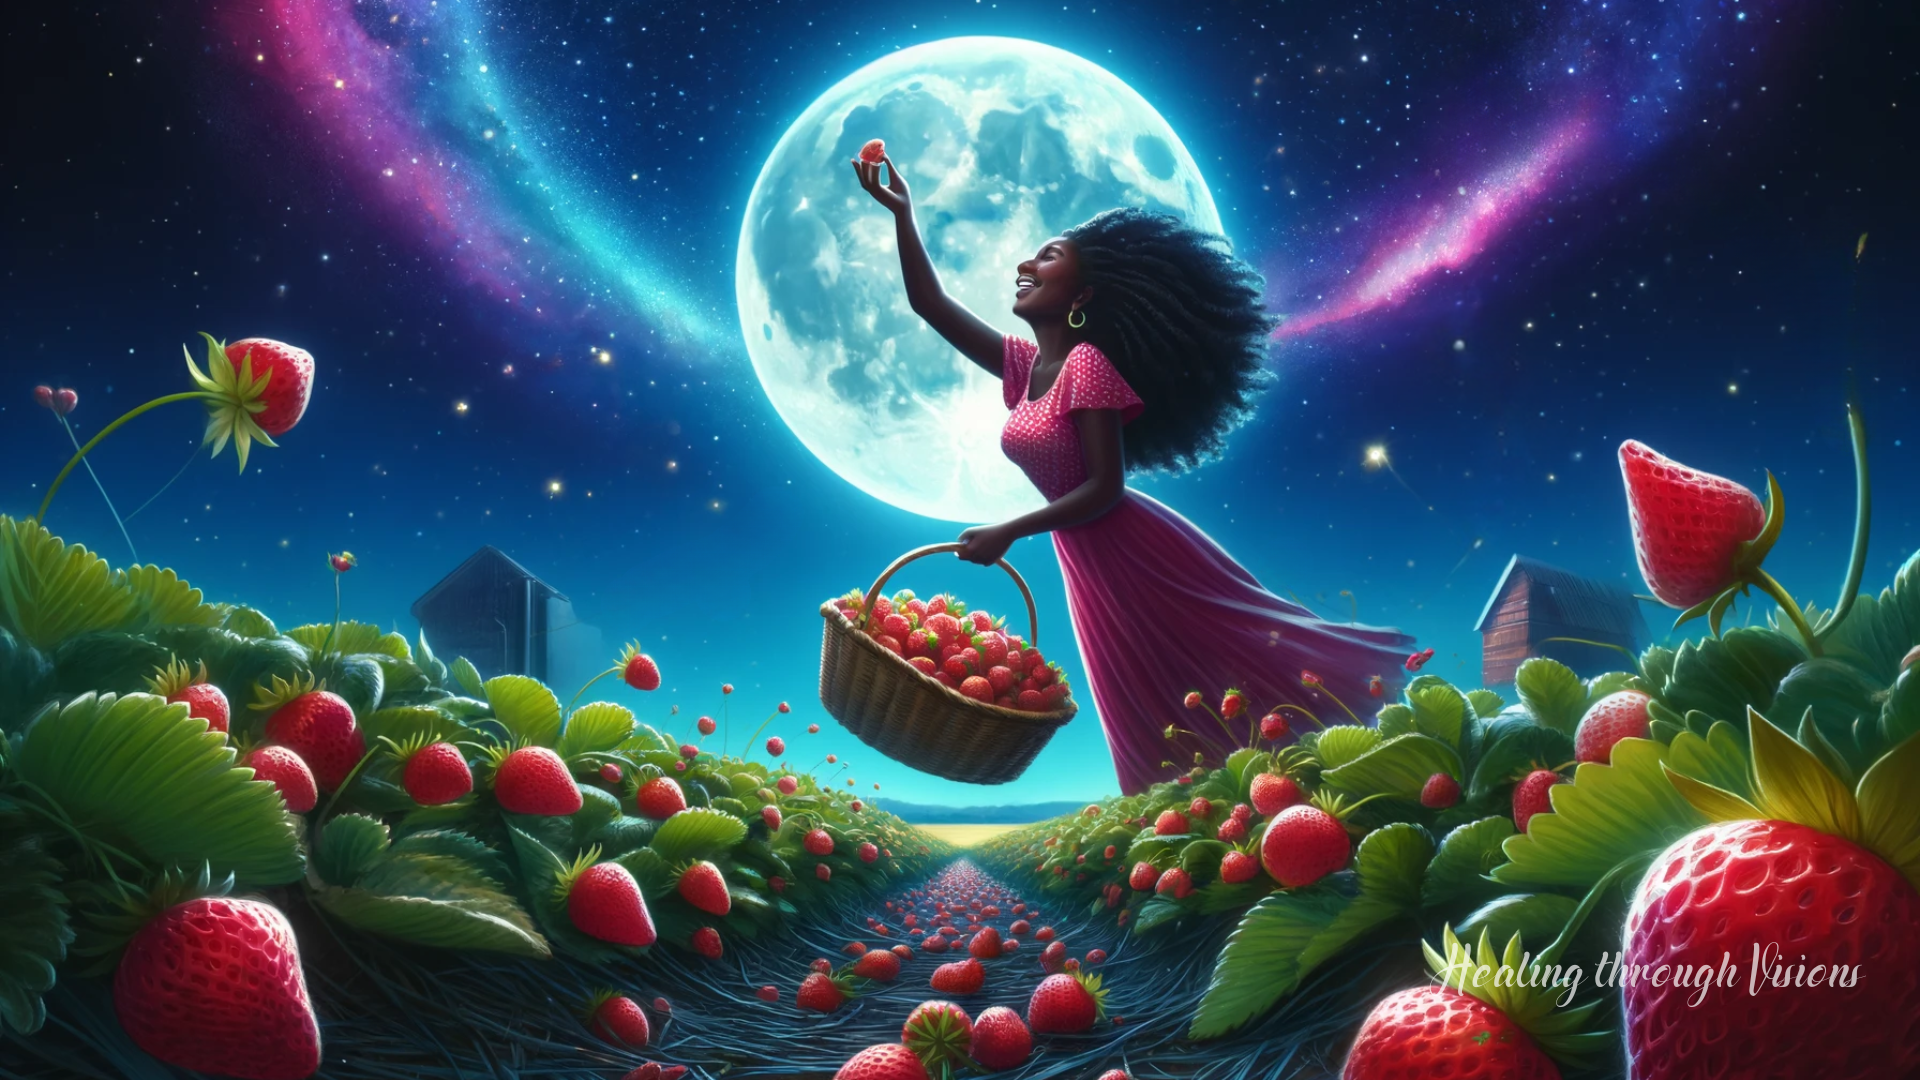 A vibrant image featuring a summer night with a brilliant full moon shining over a strawberry field, ready for harvest. A Black woman joyfully picks strawberries, celebrating abundance and the fruition of hard work.